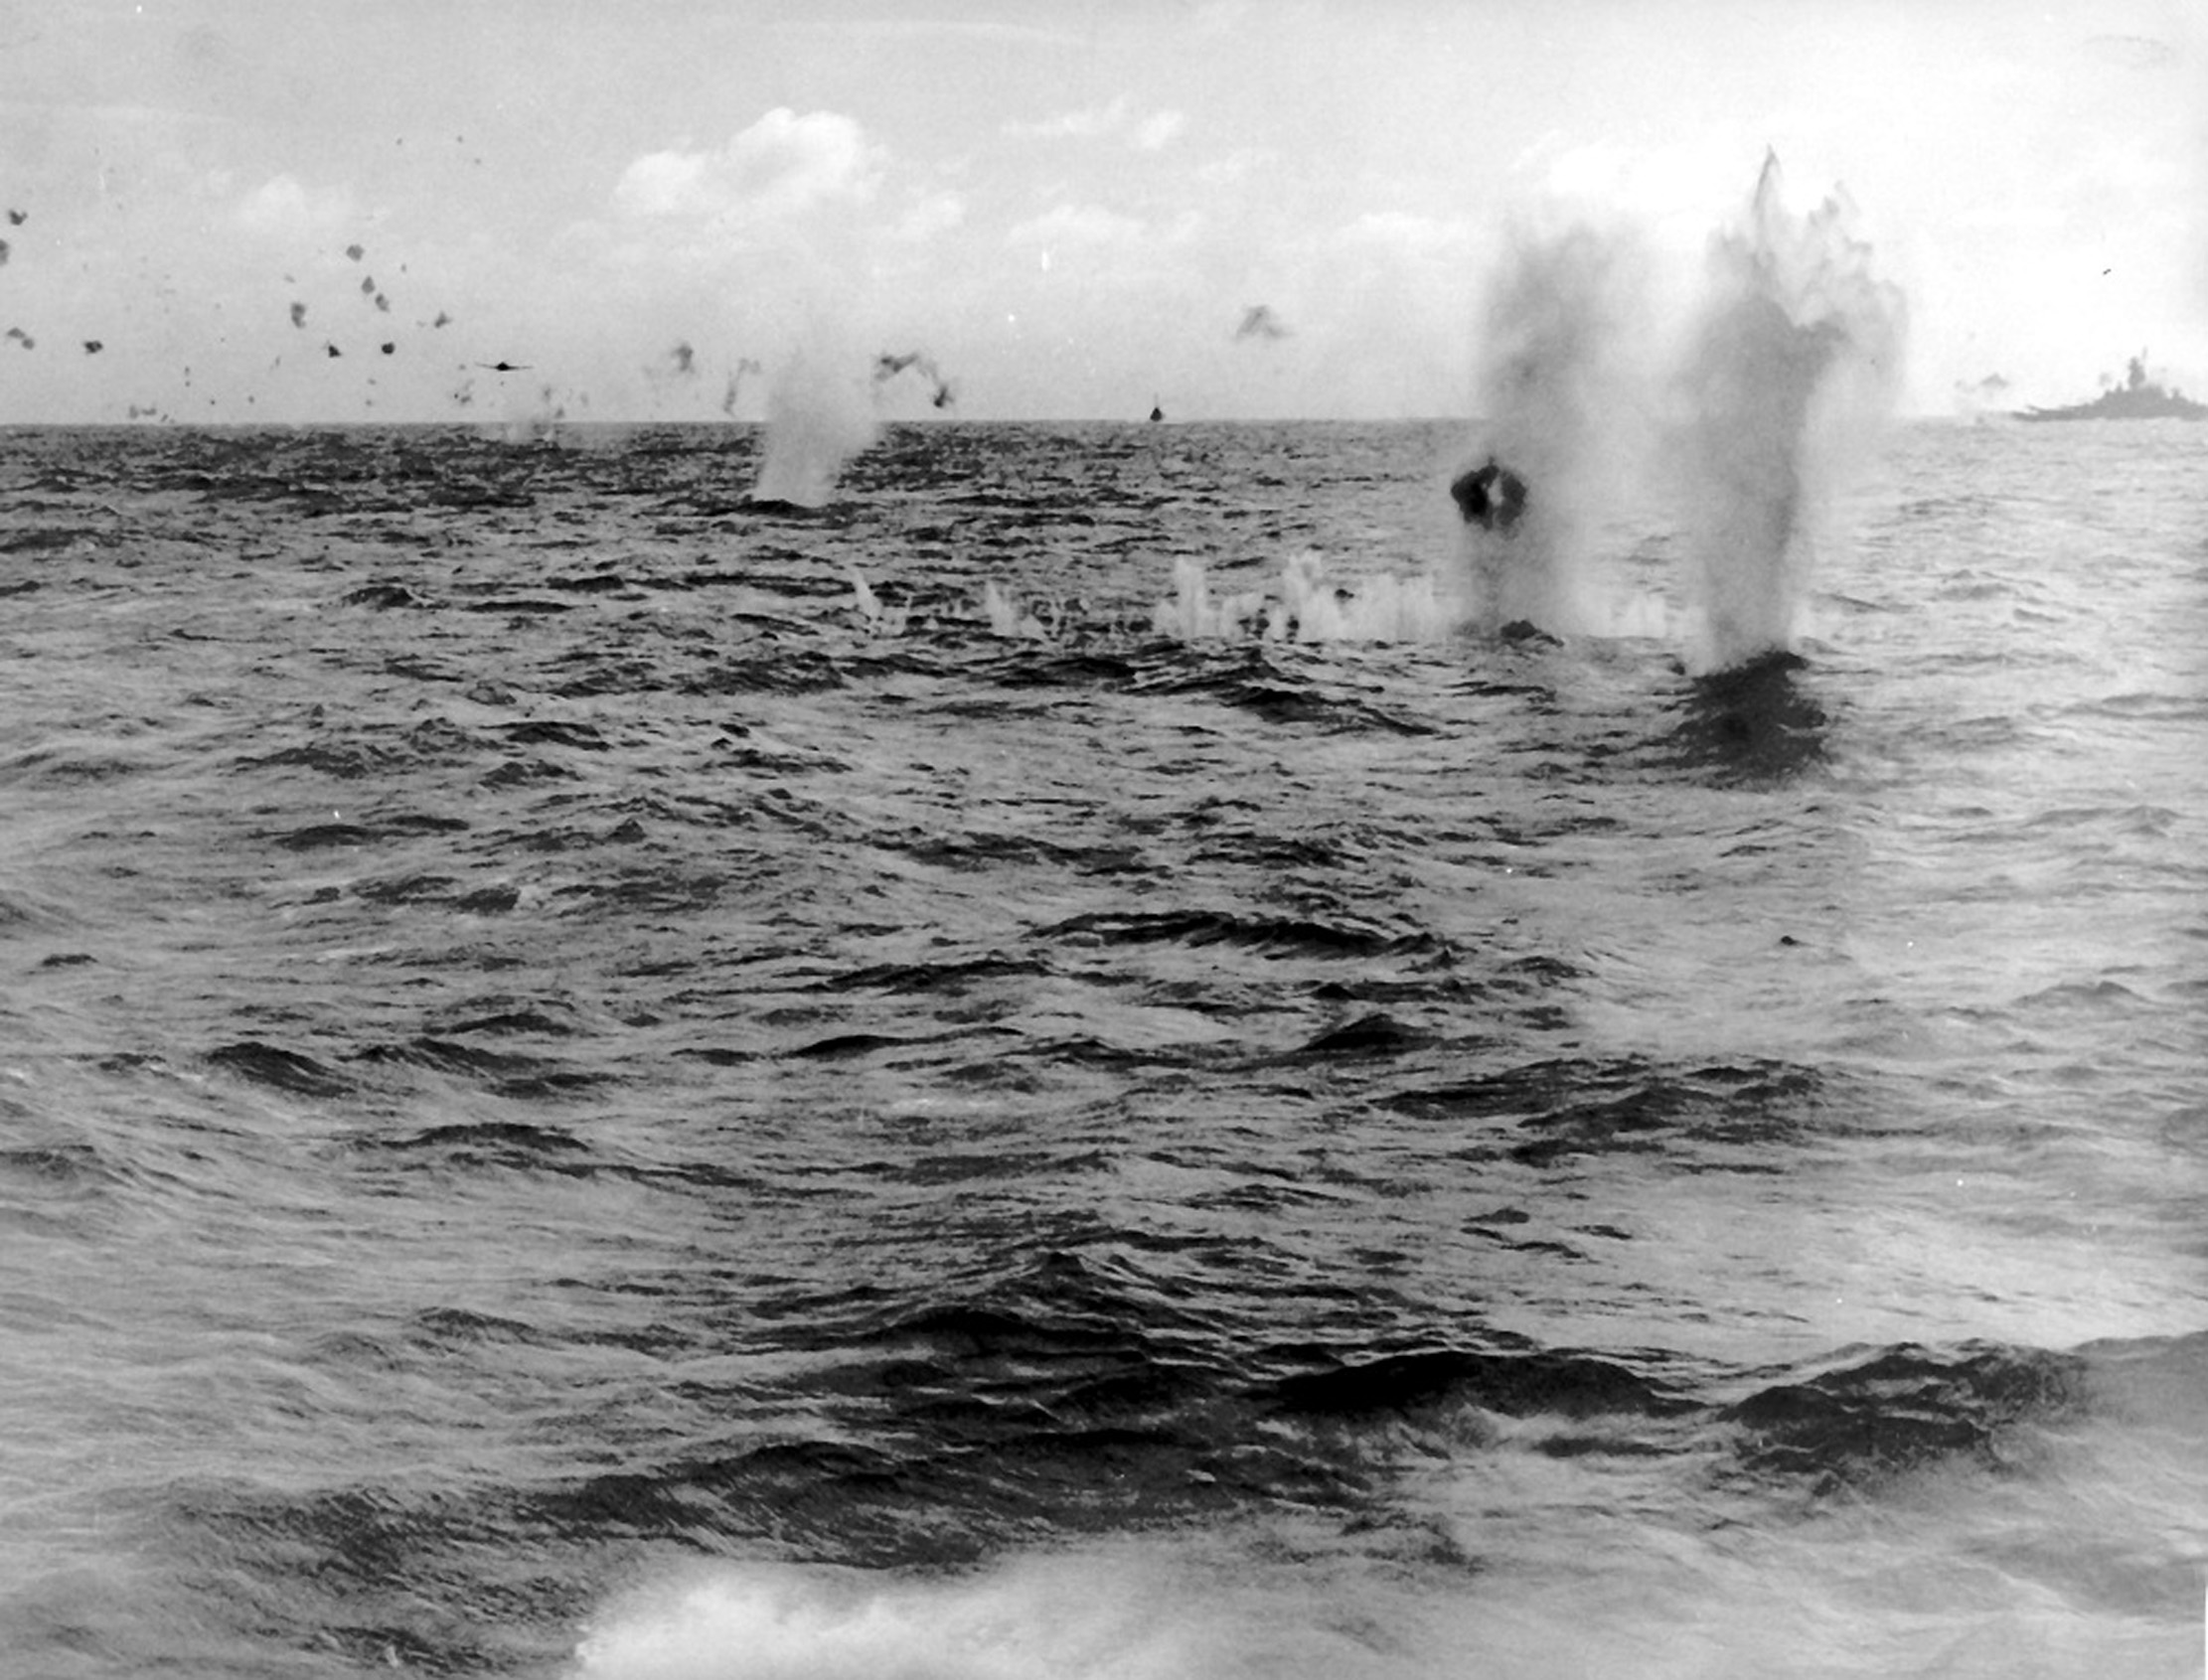 Japanese B6N aircraft releasing a torpedo in waters between Taiwan and Philippine Islands, 14 Oct 1944; USS Alabama and a destroyer in background; photo taken from USS Essex